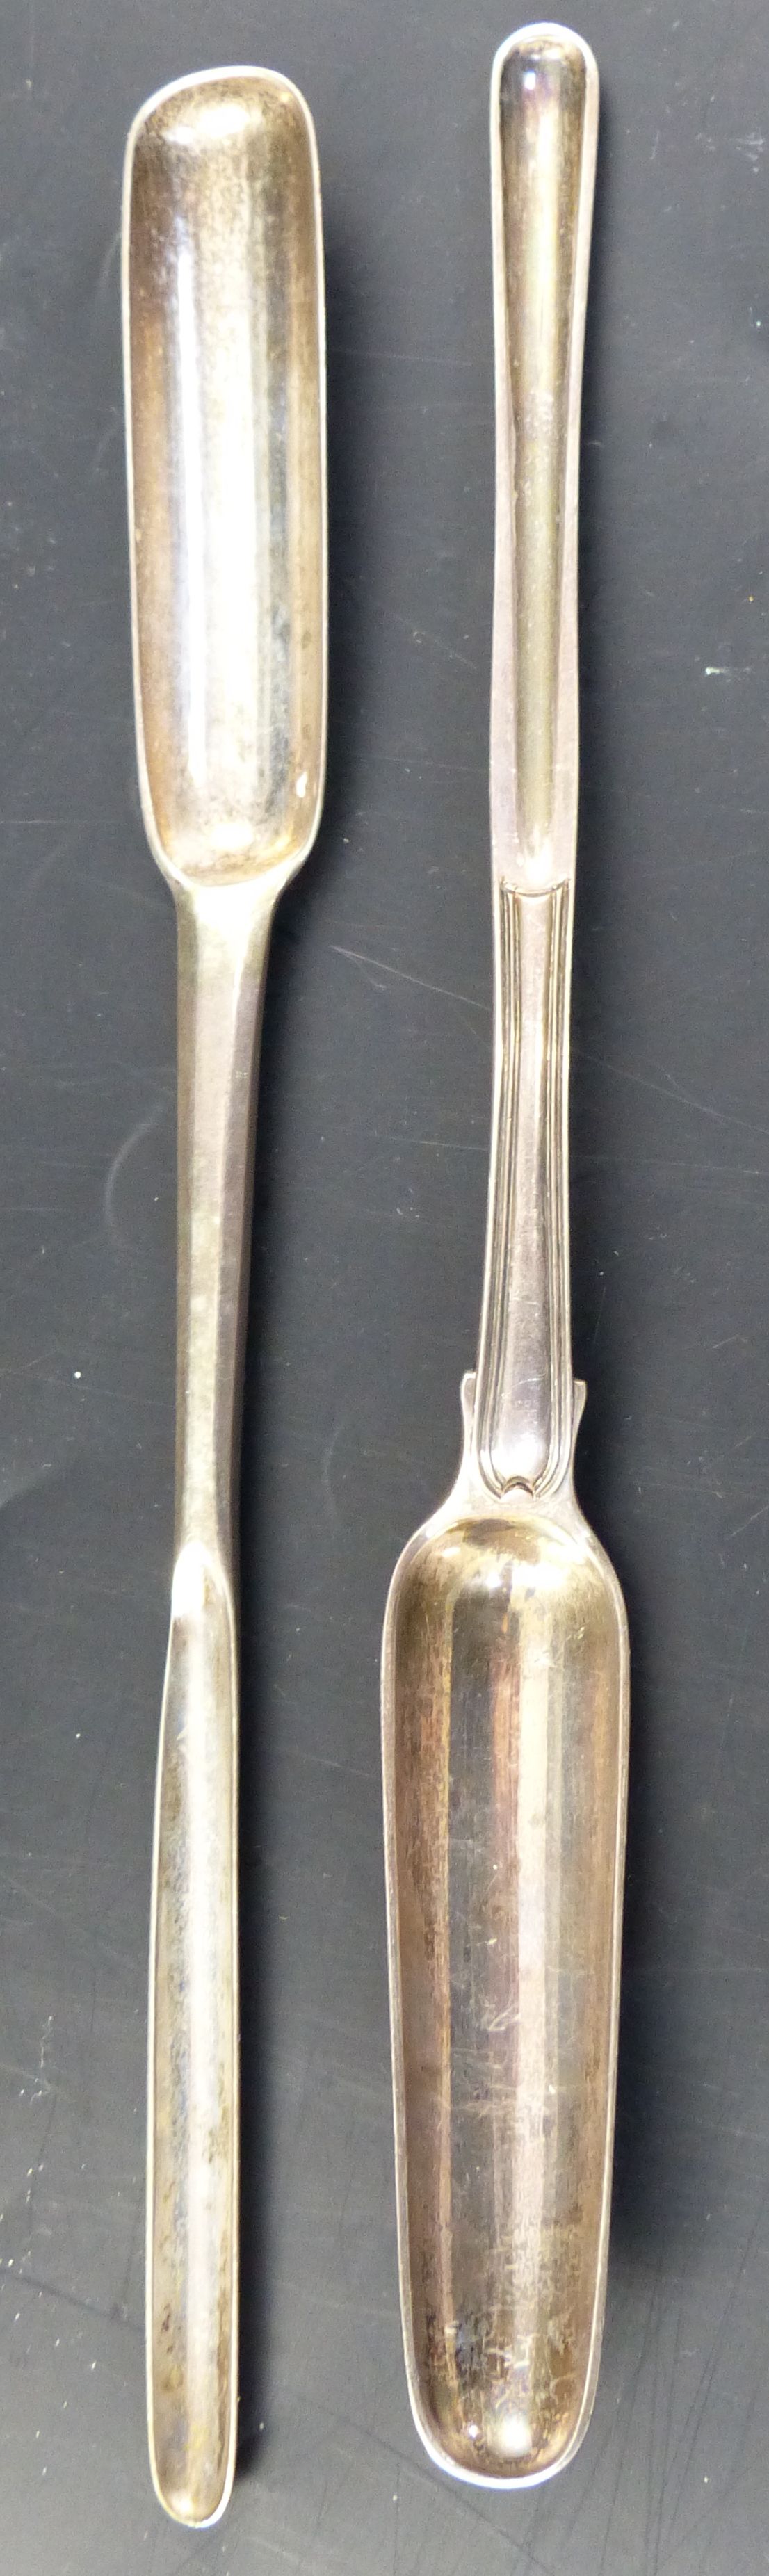 Two 19th century silver marrow scoops, thread pattern by Eley, Fearn & Chawner, London, 1808 and - Image 5 of 7